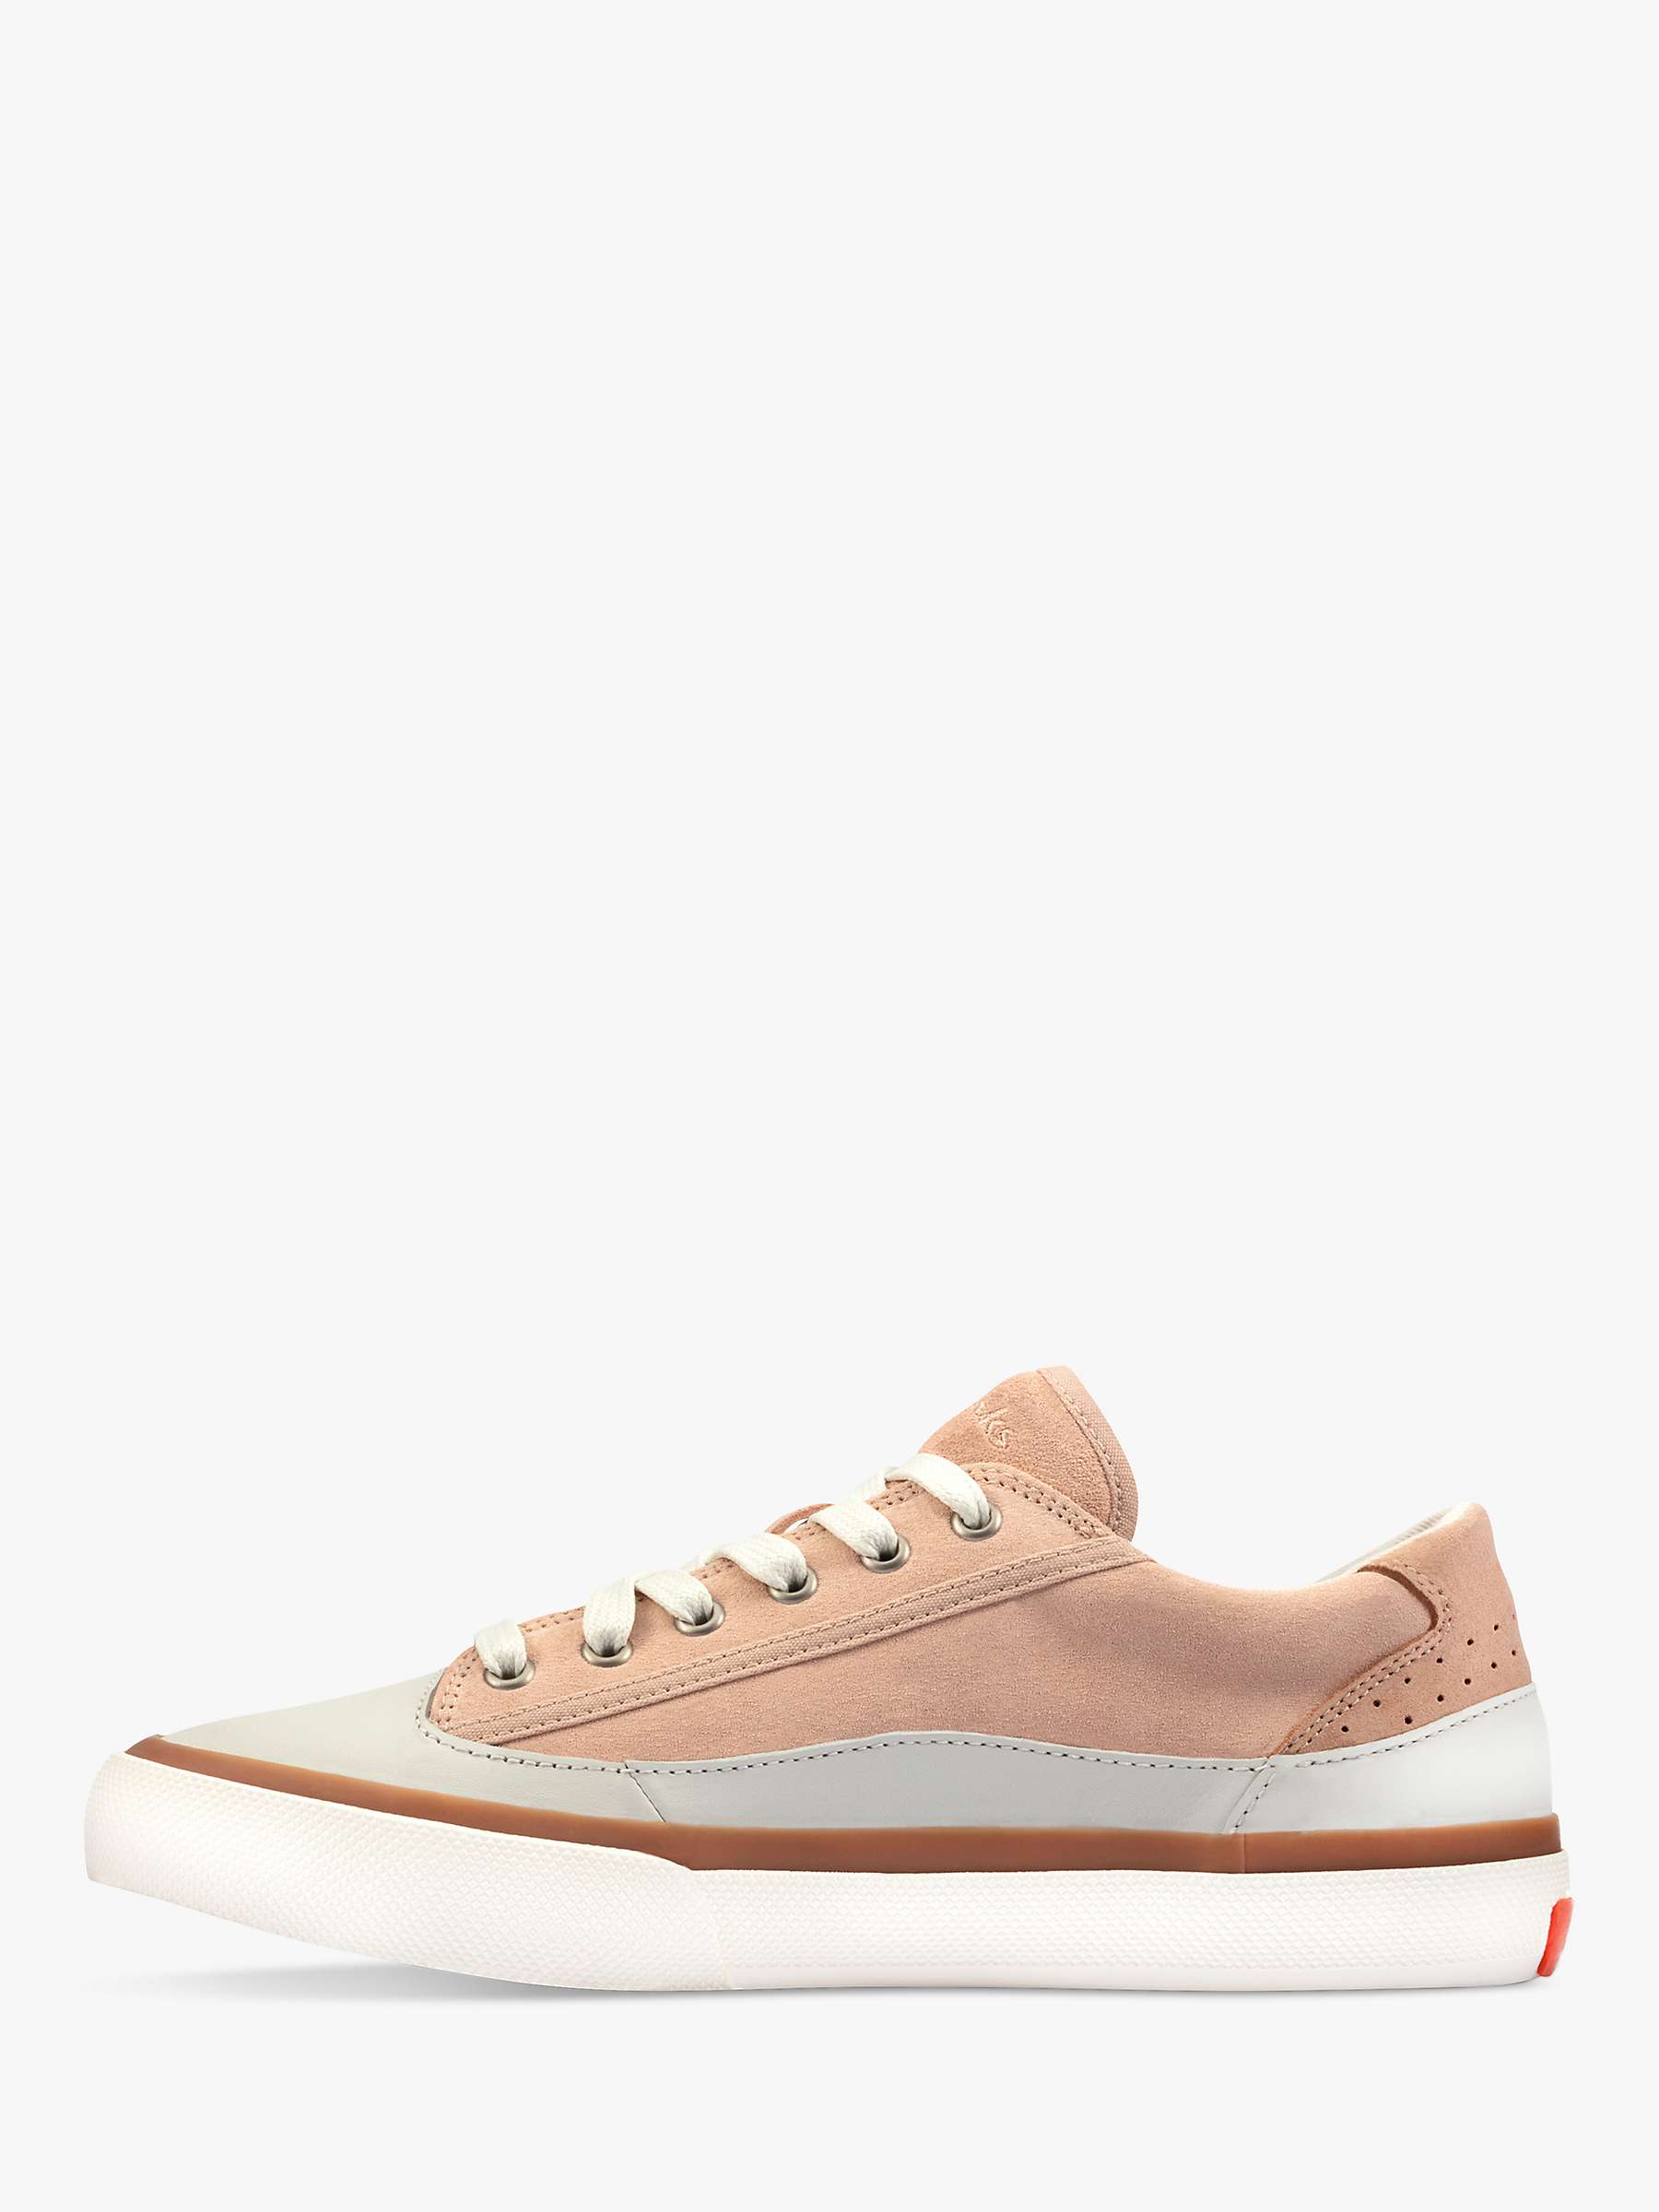 Buy Clarks Aceley Suede Lace Up Trainers, Light Pink Online at johnlewis.com